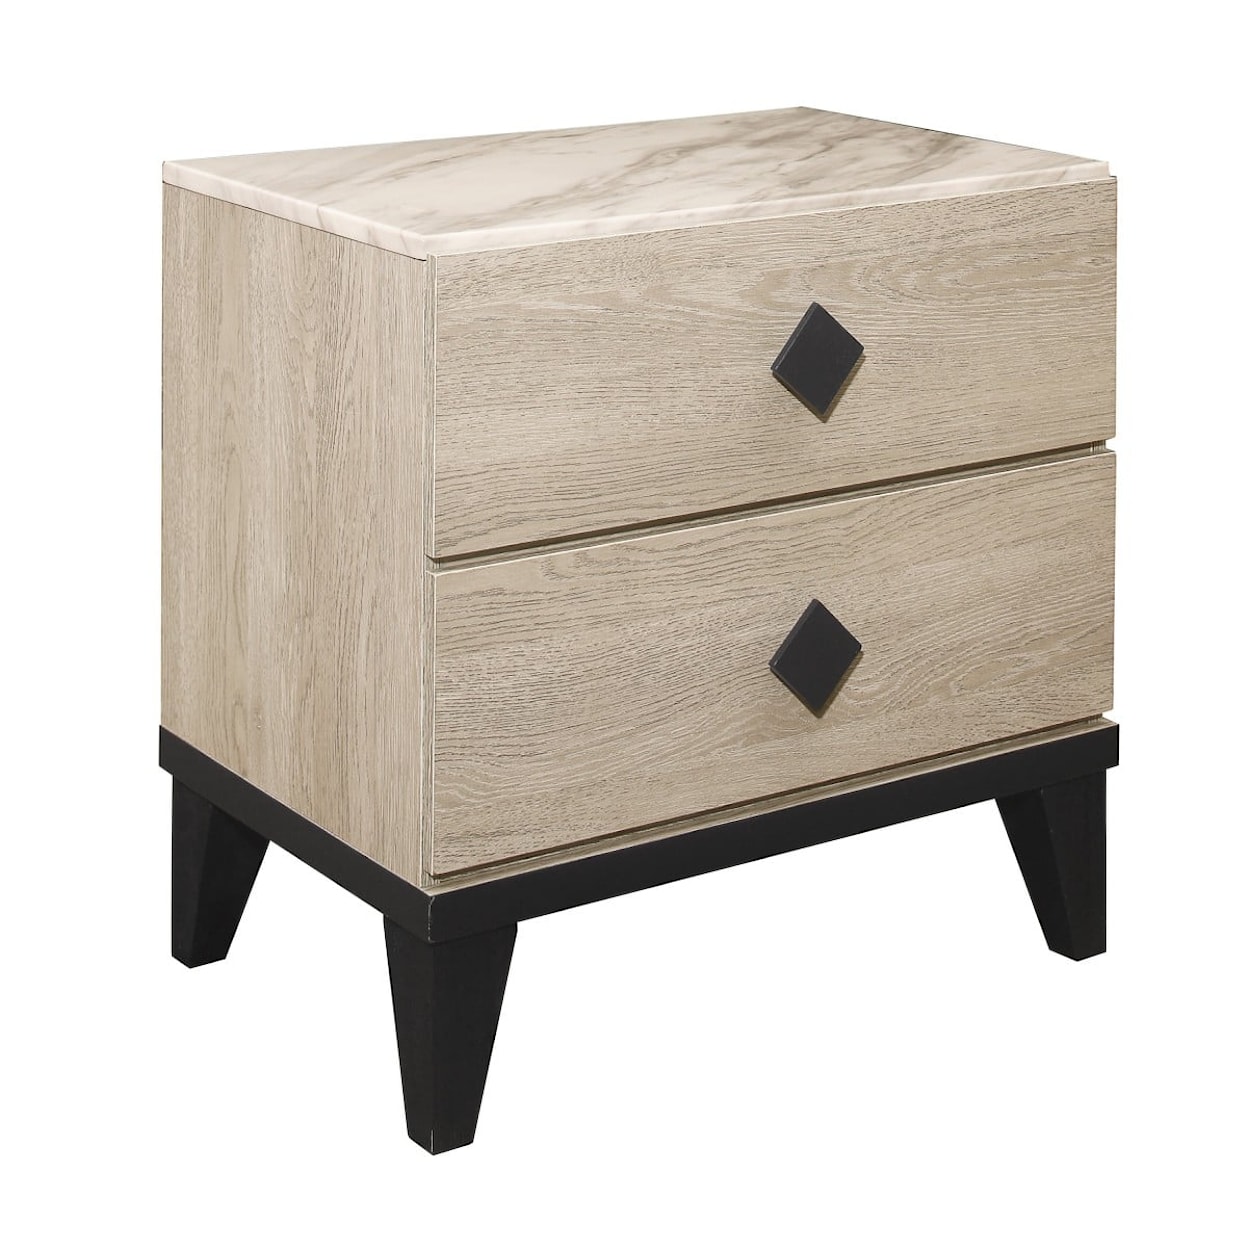 Homelegance Whiting Night Stand